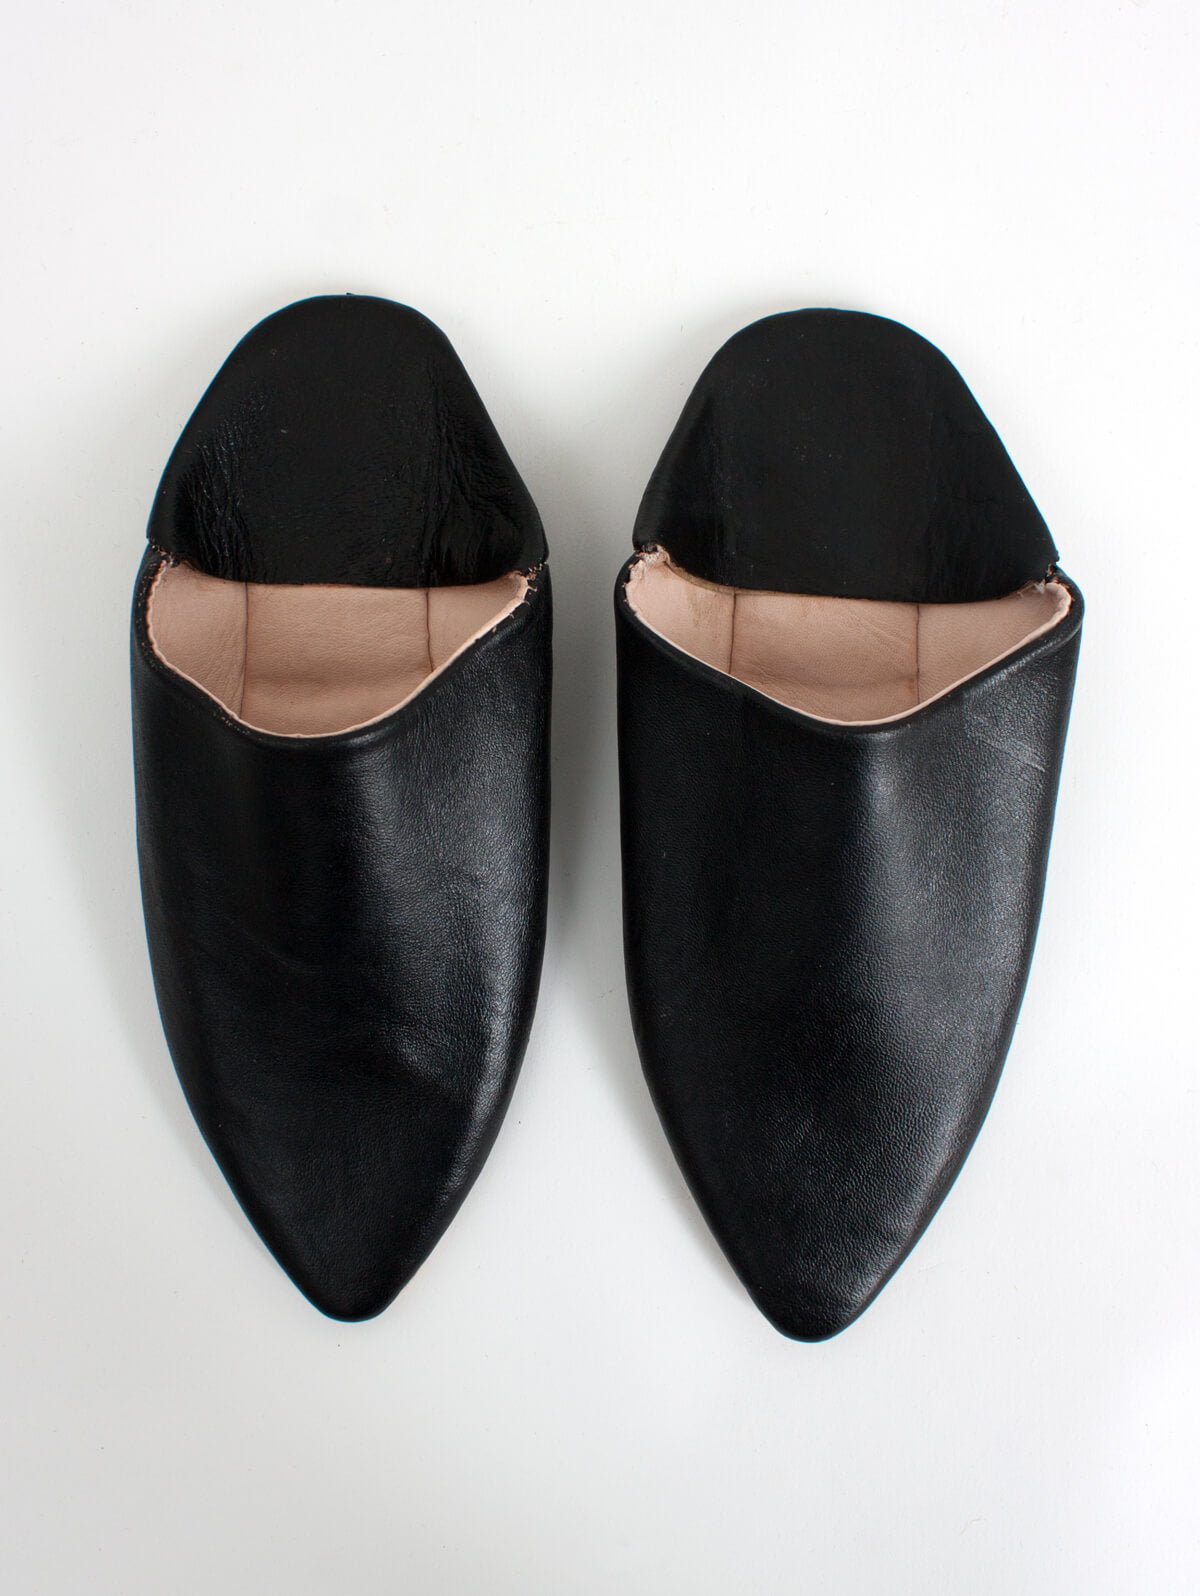 Moroccan Classic Pointed Babouche Slippers, Black